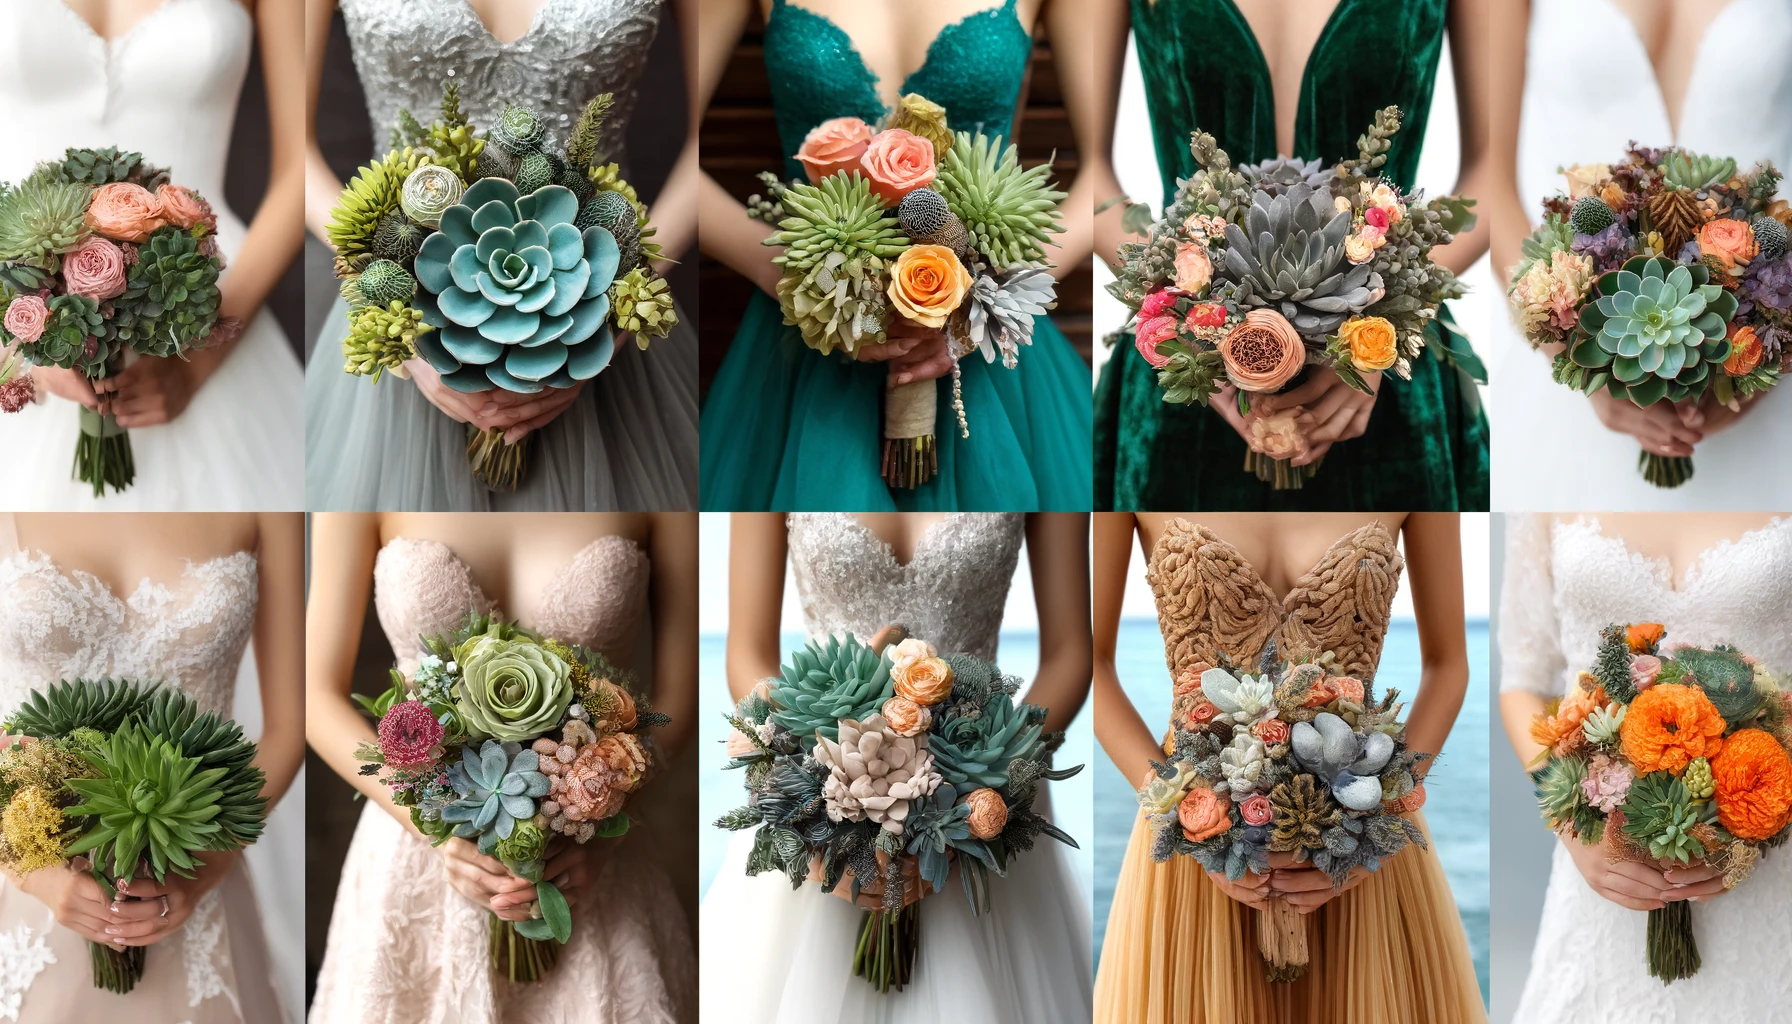 Image showcasing four different succulent wedding bouquets, each tailored to a specific wedding theme. One bouquet features an assortment of green succulents for a modern look, another combines vibrant succulents with roses, peonies, and dahlias for a mixed bouquet. The third bouquet includes rustic elements like wildflowers and wooden accents, and the fourth is beach-themed with seashells and coral-like succulents. Each bouquet is held by a bride dressed in a theme-coordinating wedding gown.